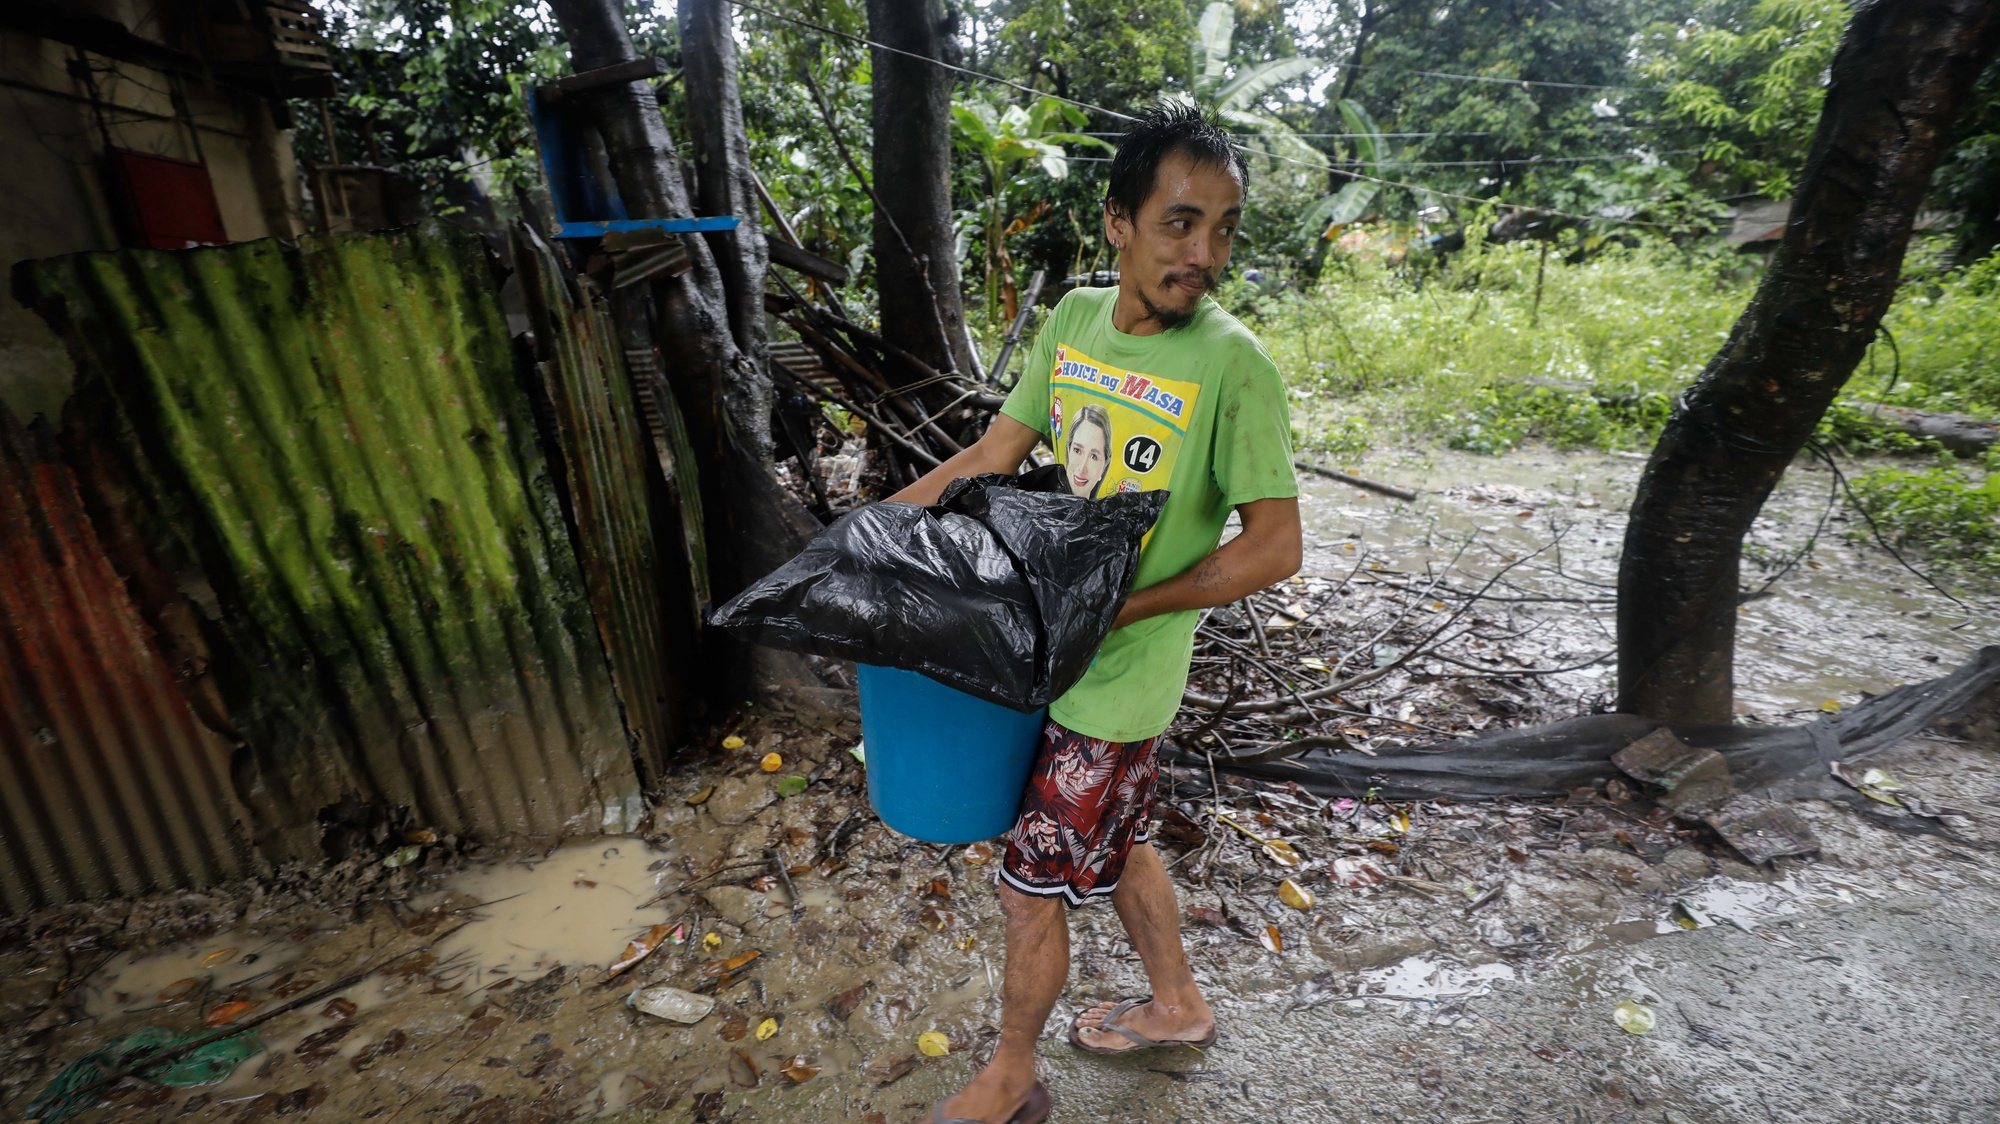 epa10272507 A resident carries his belongings on his way to an evacuation center to avoid possible floods due to Typhoon Nalgae in a riverside community in Quezon City, Metro Manila, Philippines, 29 October 2022. Data from the National Disaster Risk Reduction and Management Council (NDRRMC) showed that 45 people died from the effects of Typhoon Nalgae as of 29 October. Tracking by the countryâ€™s weather bureau places the typhoon in the southern Luzon region moving in a west southwestward direction.  EPA/ROLEX DELA PENA